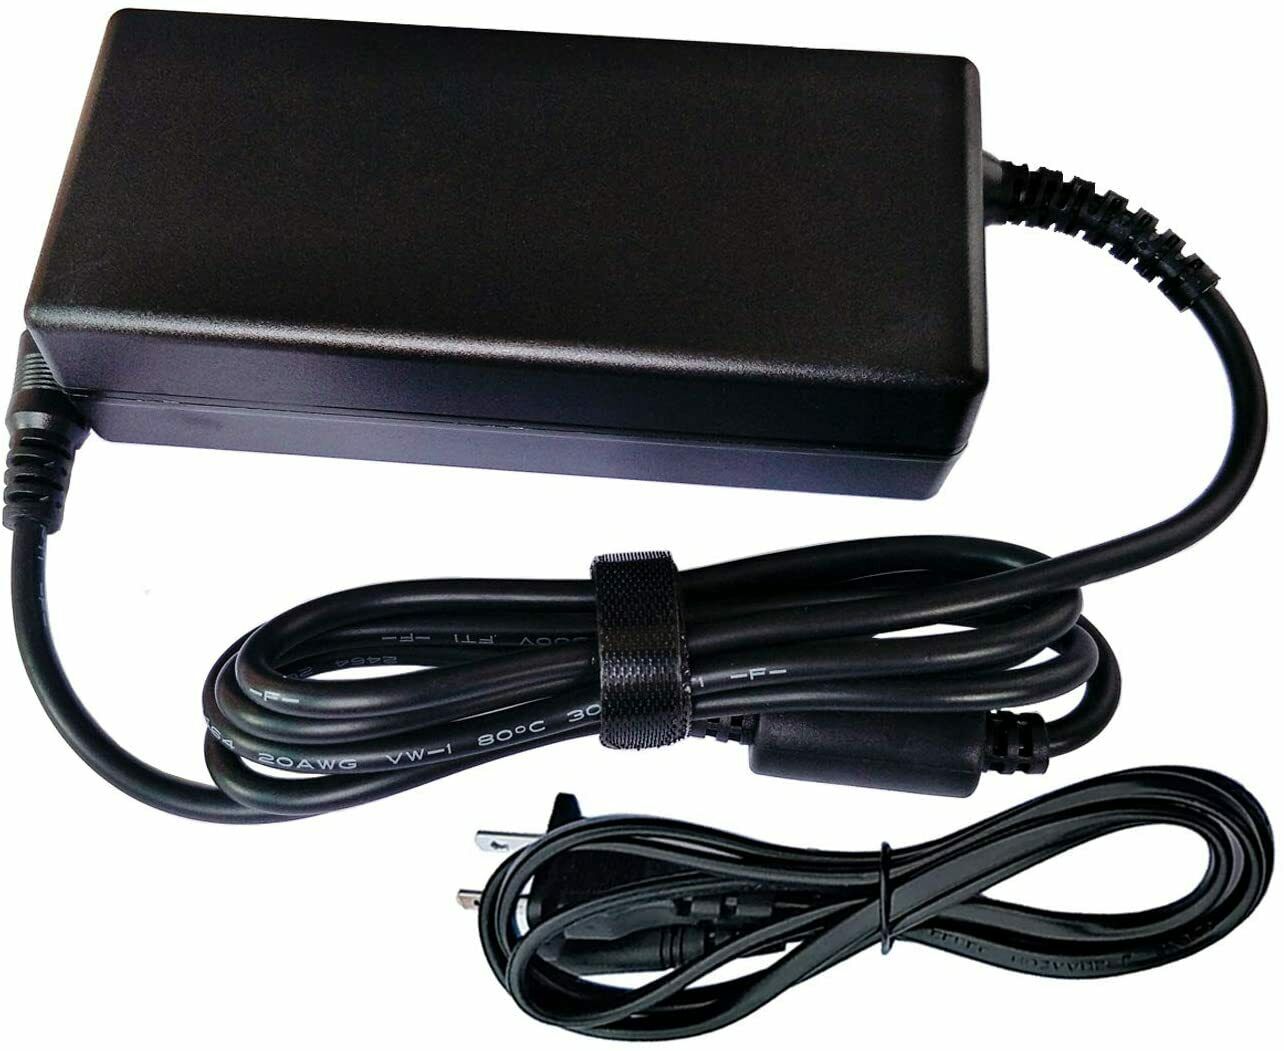 AC Adapter for Sony SRS-BTX500 SRSBTX500 Wireless Portable Speaker Power Supply Specifications: Type: AC to DC Standar - Click Image to Close